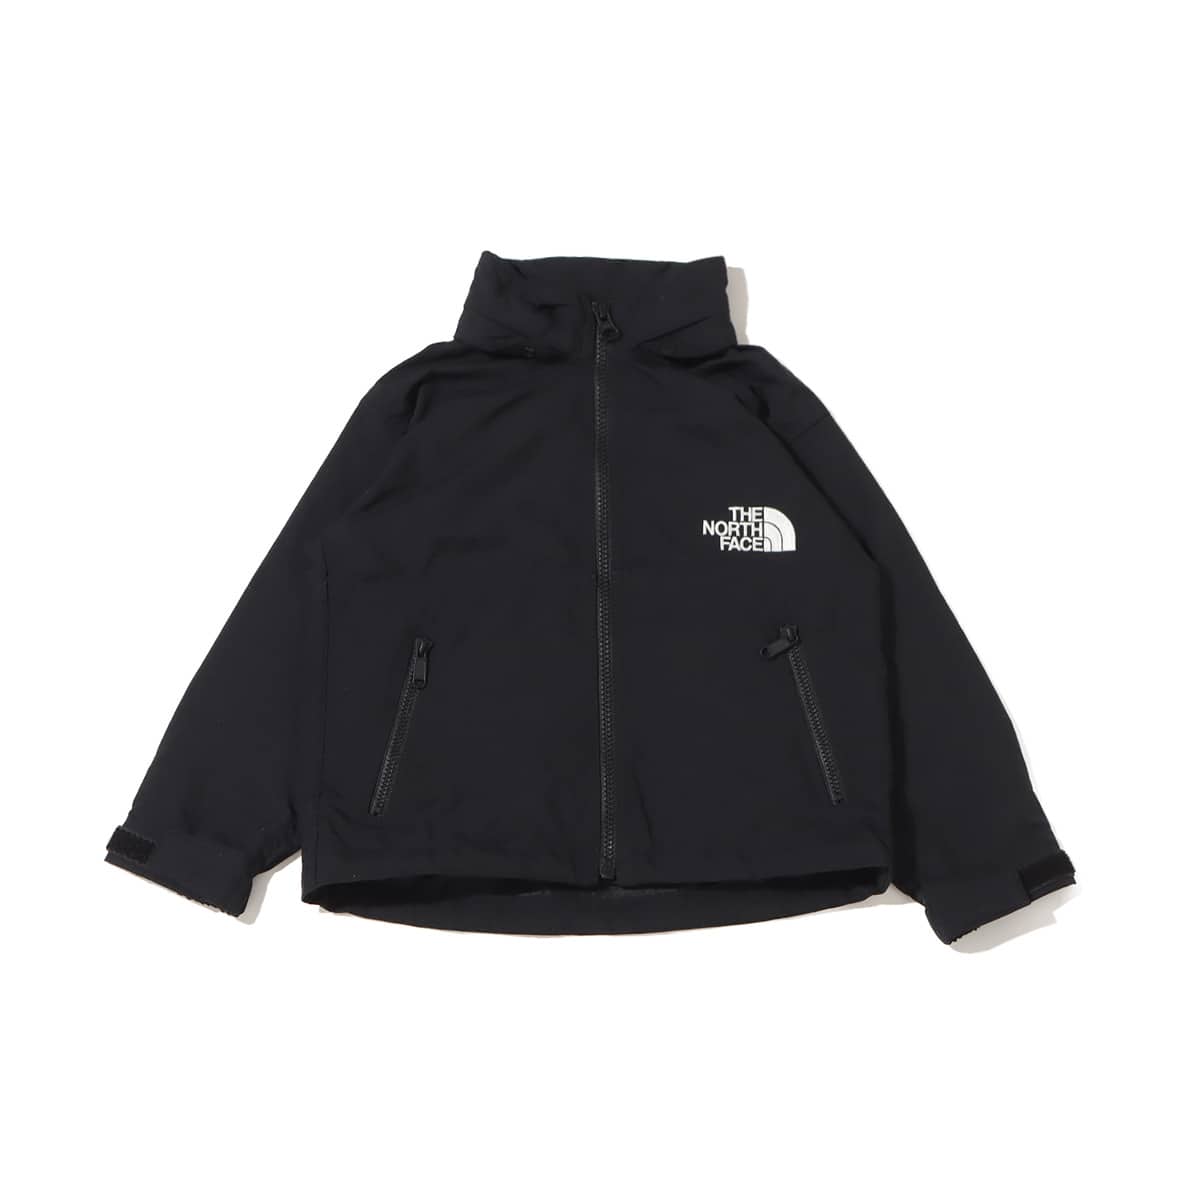 THE NORTH FACE BABY COMPACT JACKET BLACK 23FW-I